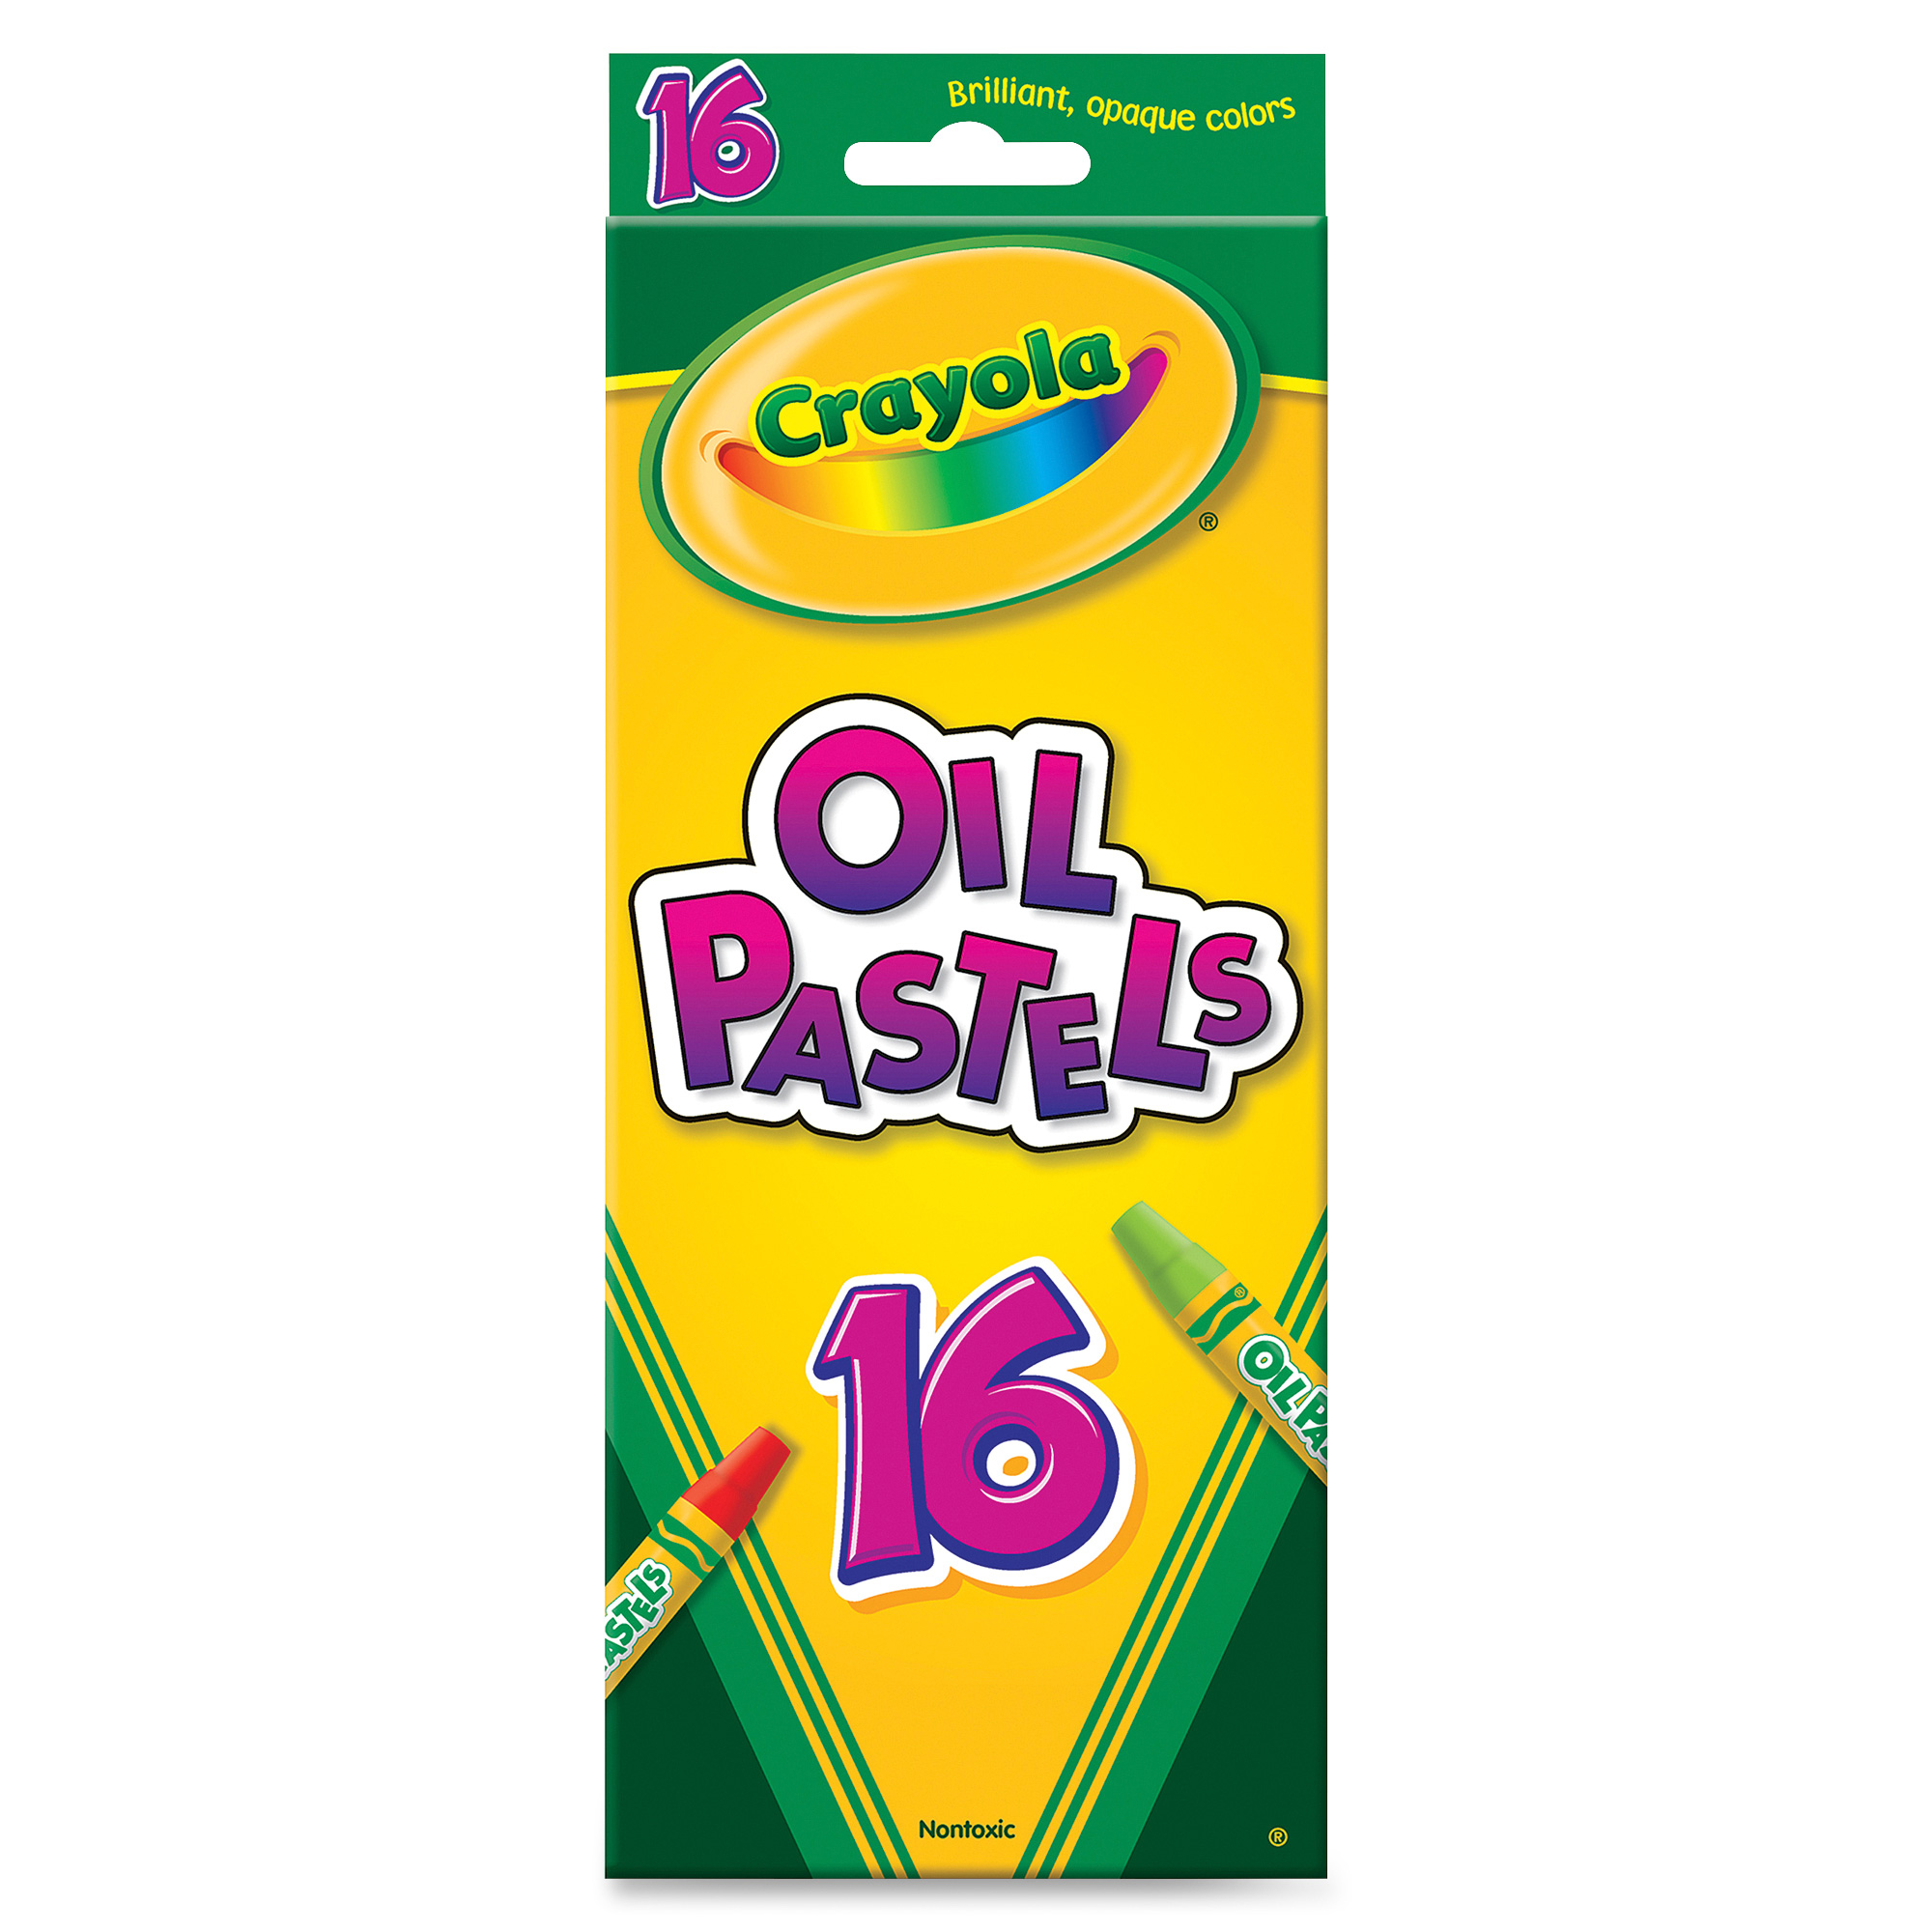 Crayola Oil Pastels, Assorted Colors, Set of 16 - image 2 of 7